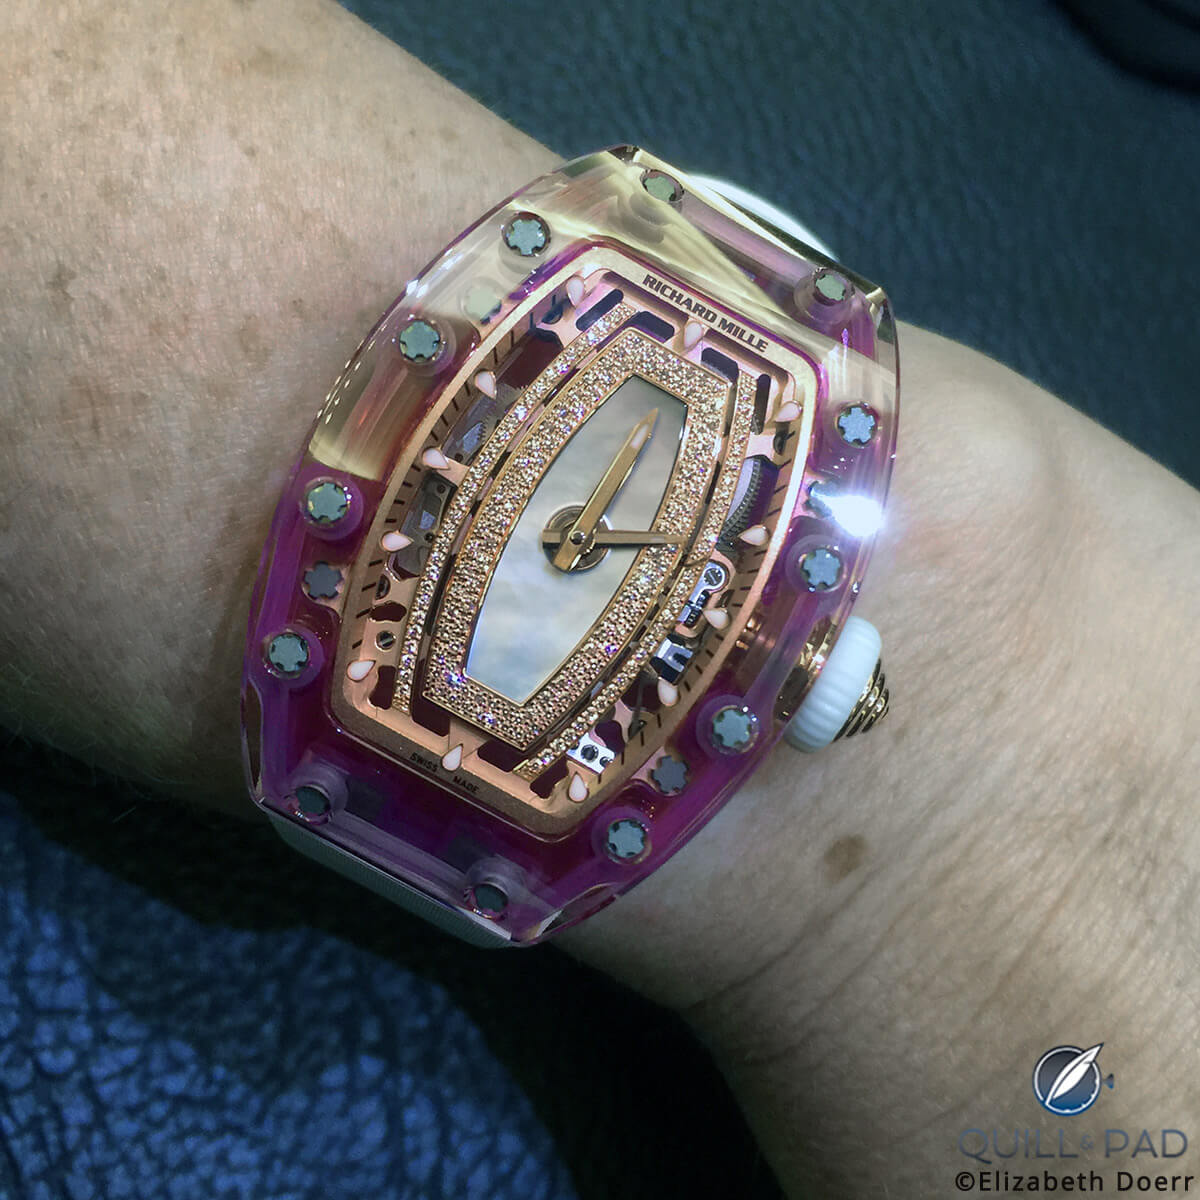 Richard Mille RM 07-02 Pink Lady Sapphire on the wrist